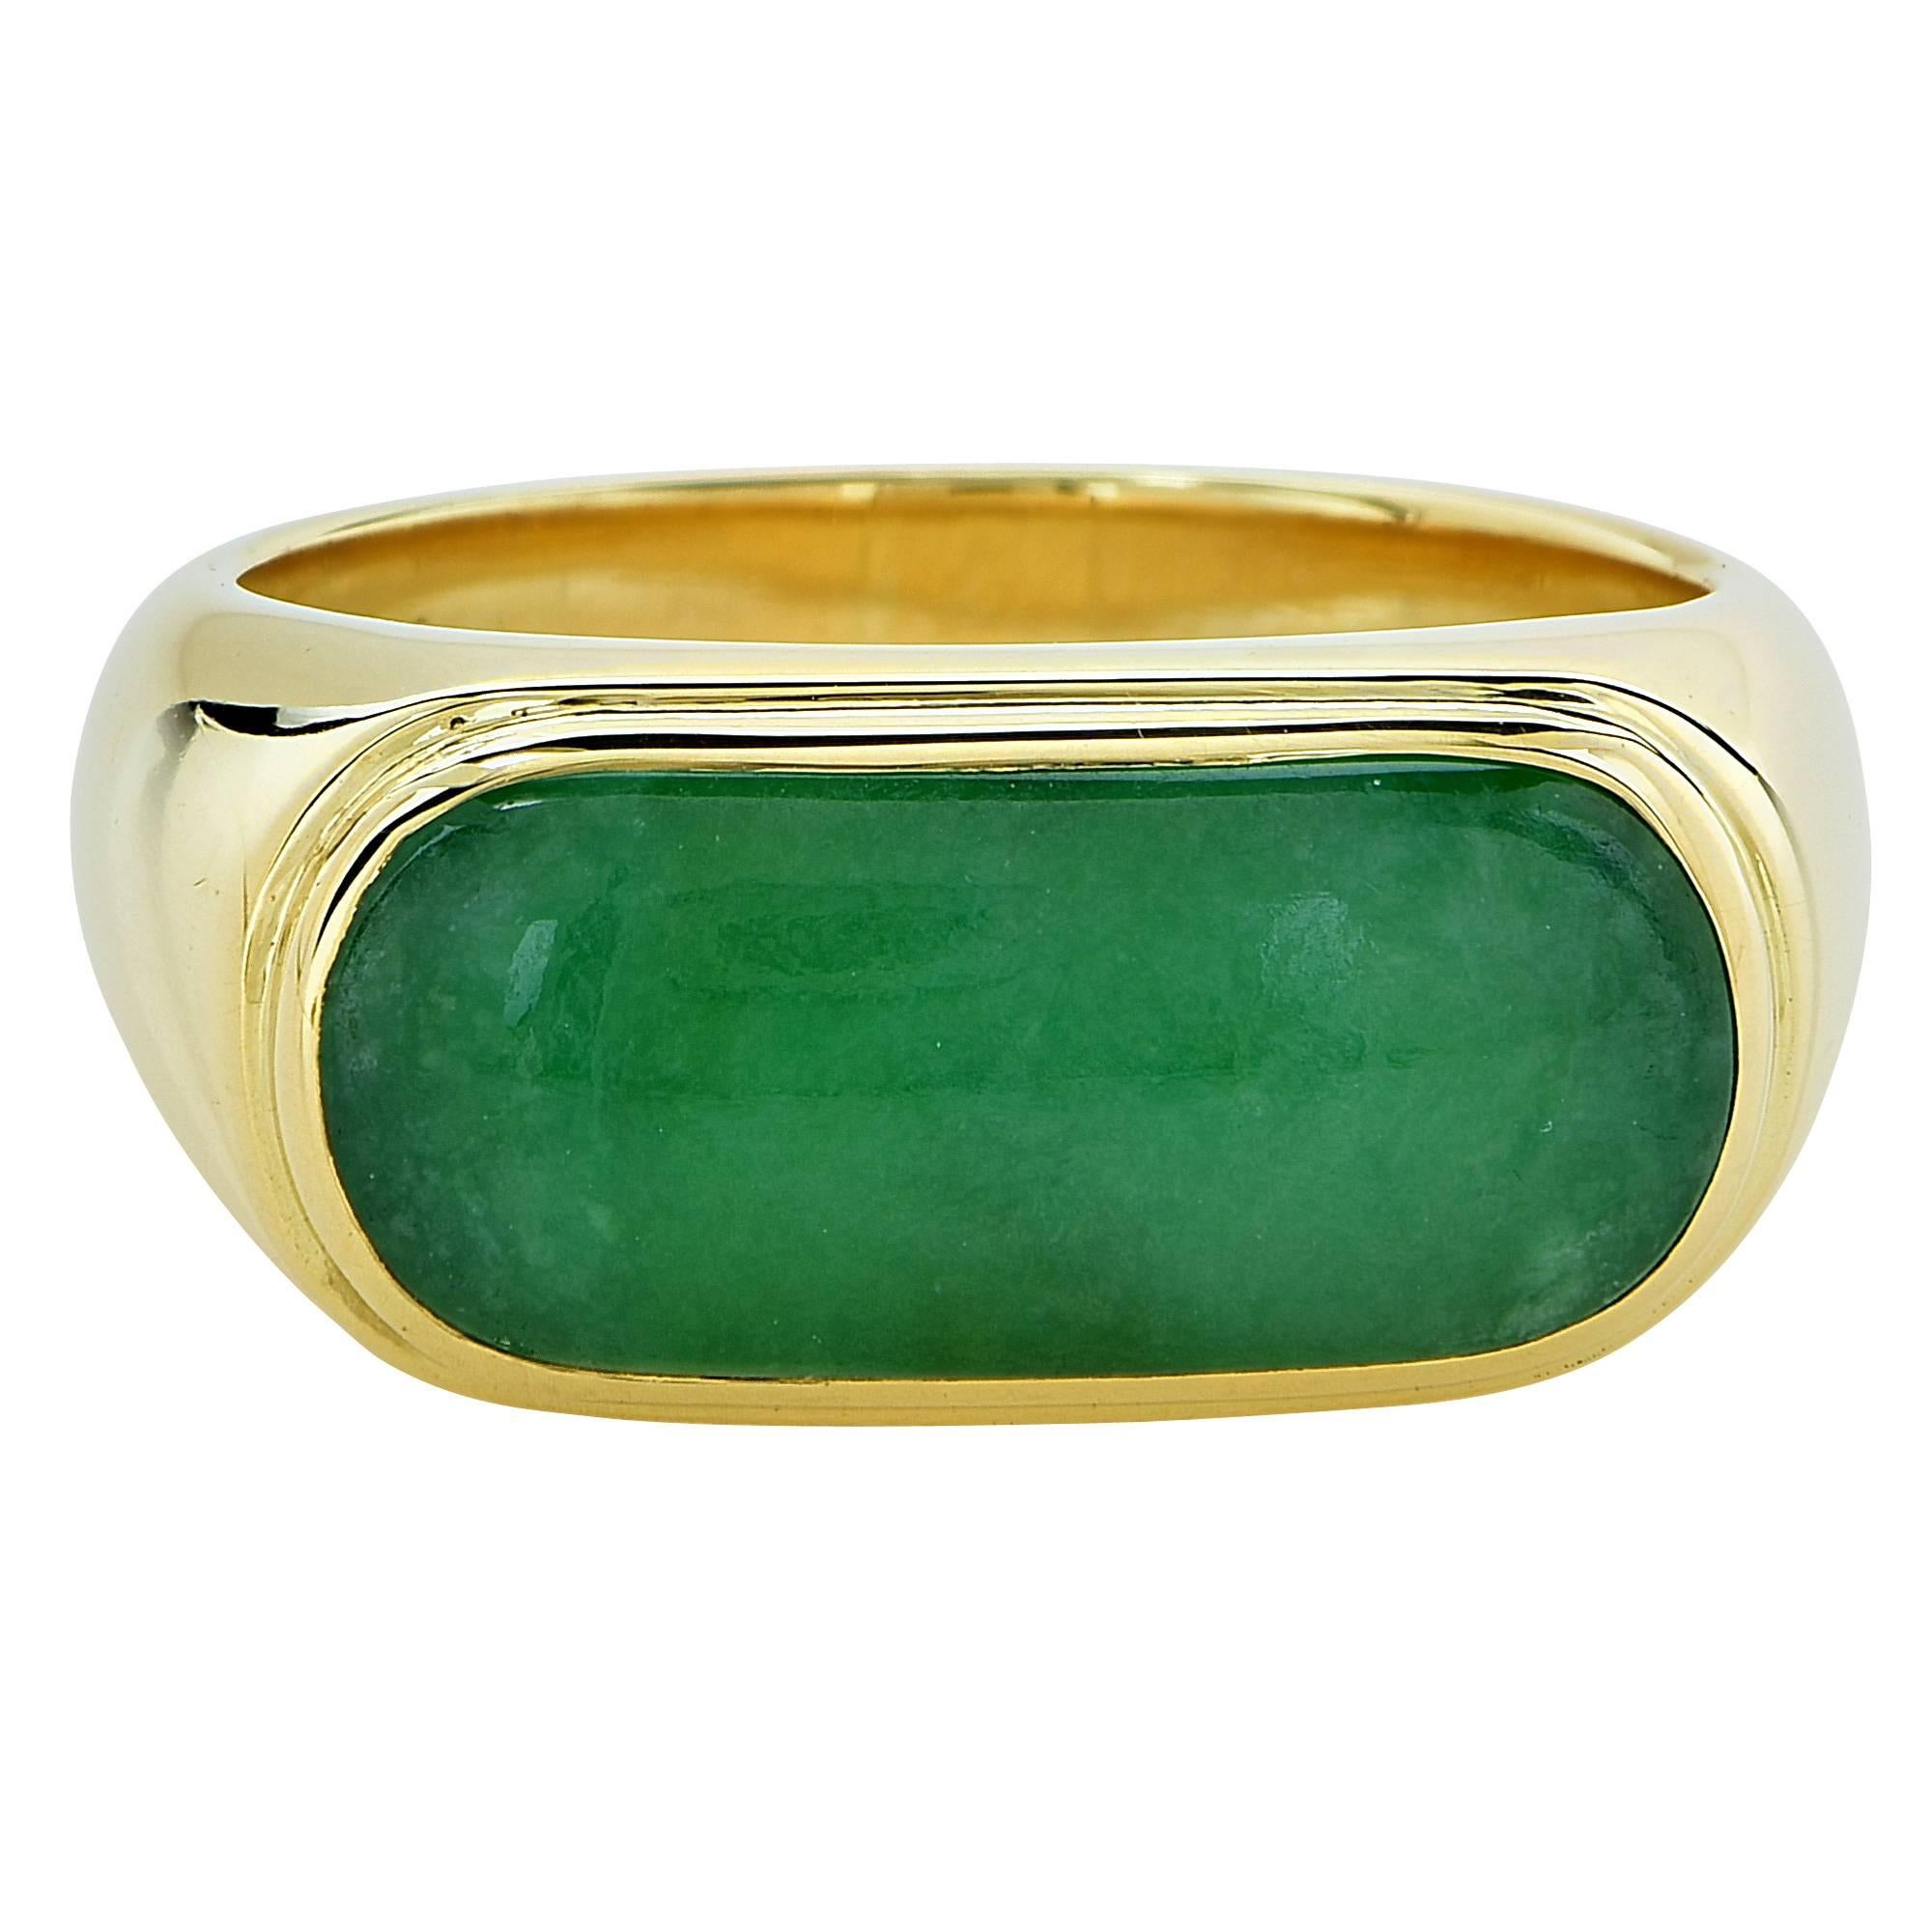 18k yellow gold jade ring.

Ring size: 6 (can be sized up or down free of charge)
Metal weight: 9.05 grams

This jade ring is accompanied by a retail appraisal performed by a Graduate Gemologist.